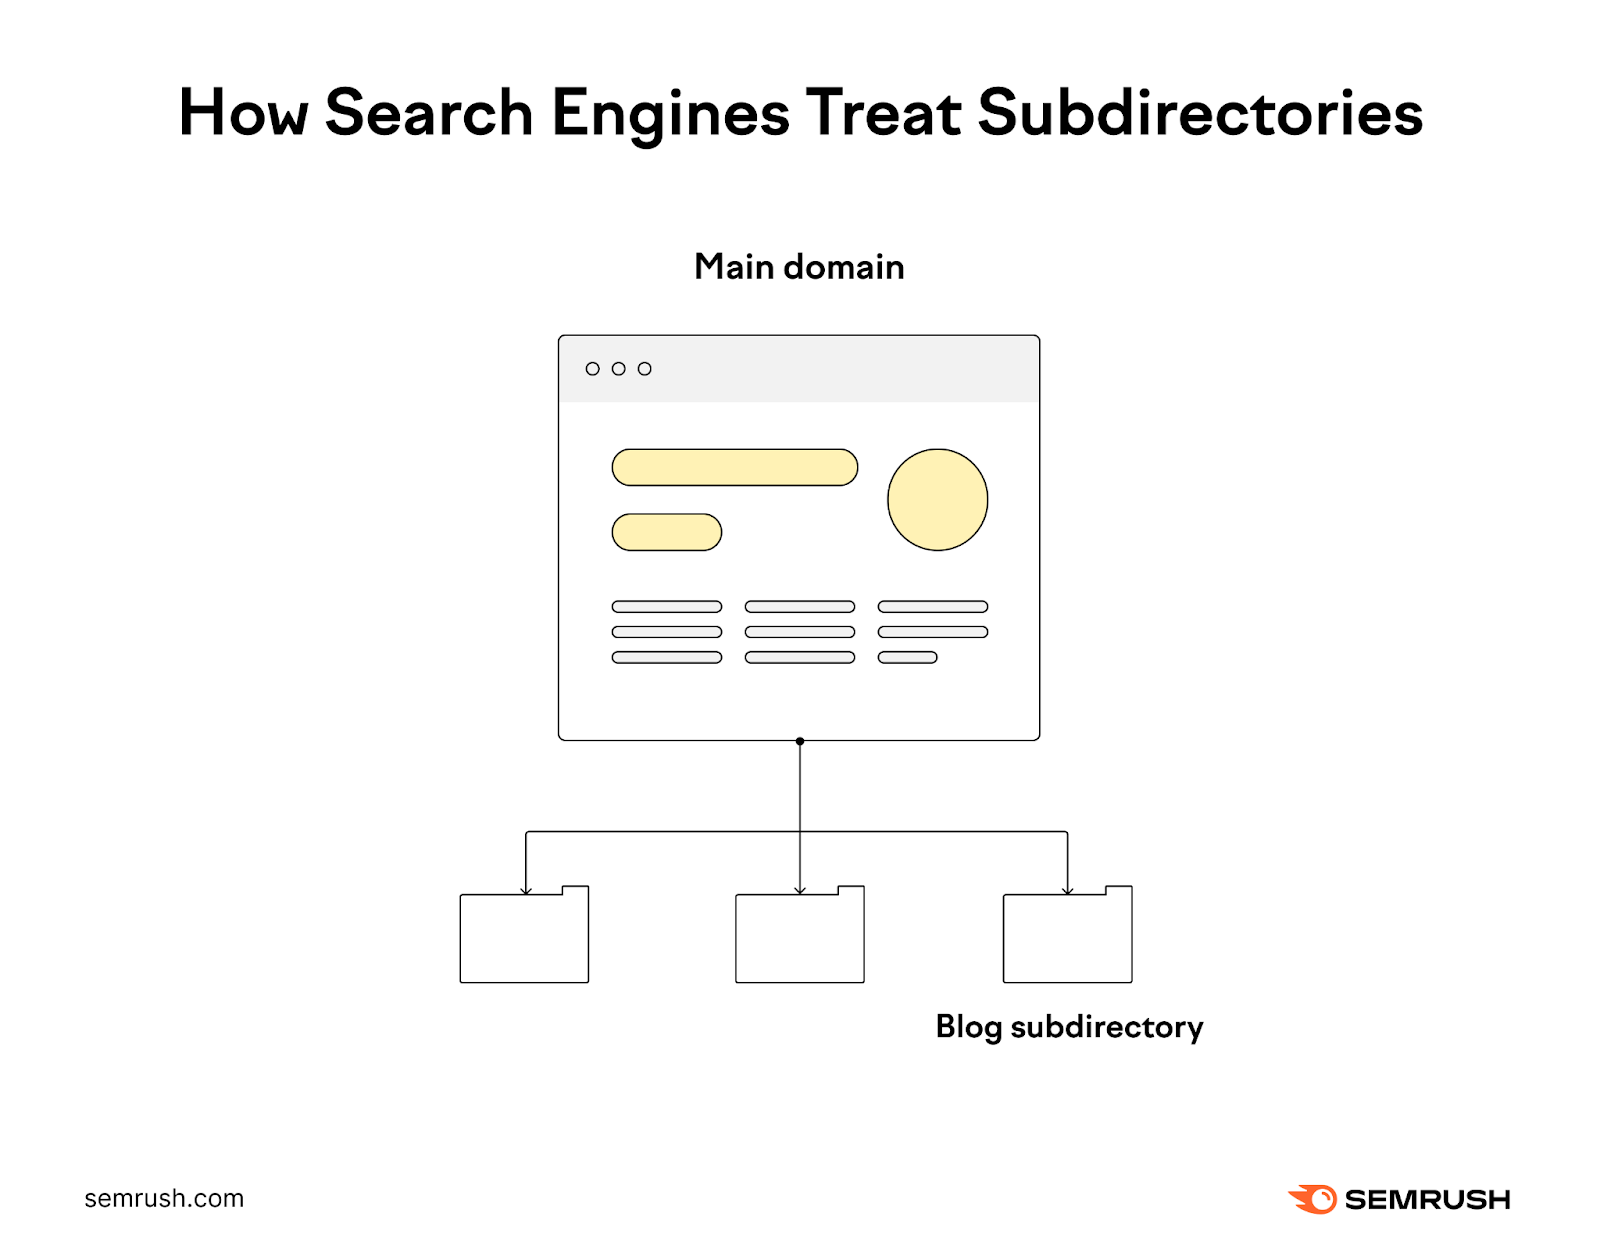 An infographic showing how search engines treat subdirectories